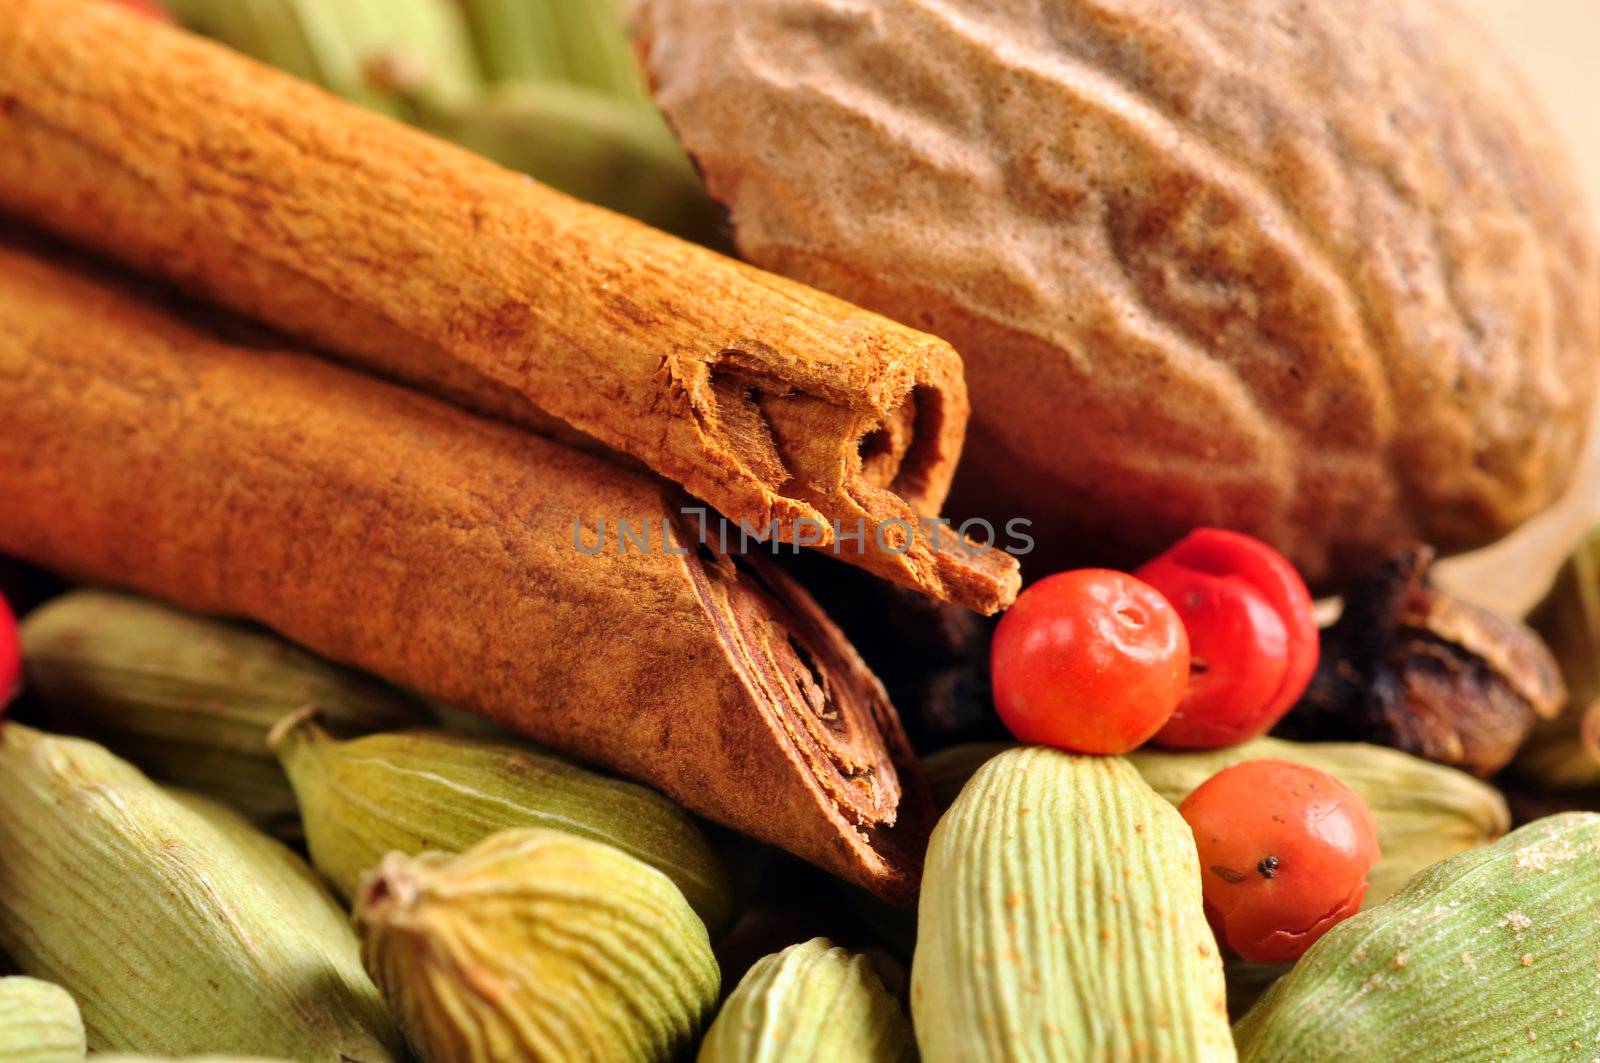 Beautiful arrangement of whole natural colorful spices, cinnamon, cardamom, nutmeg, pink pepper and clove.